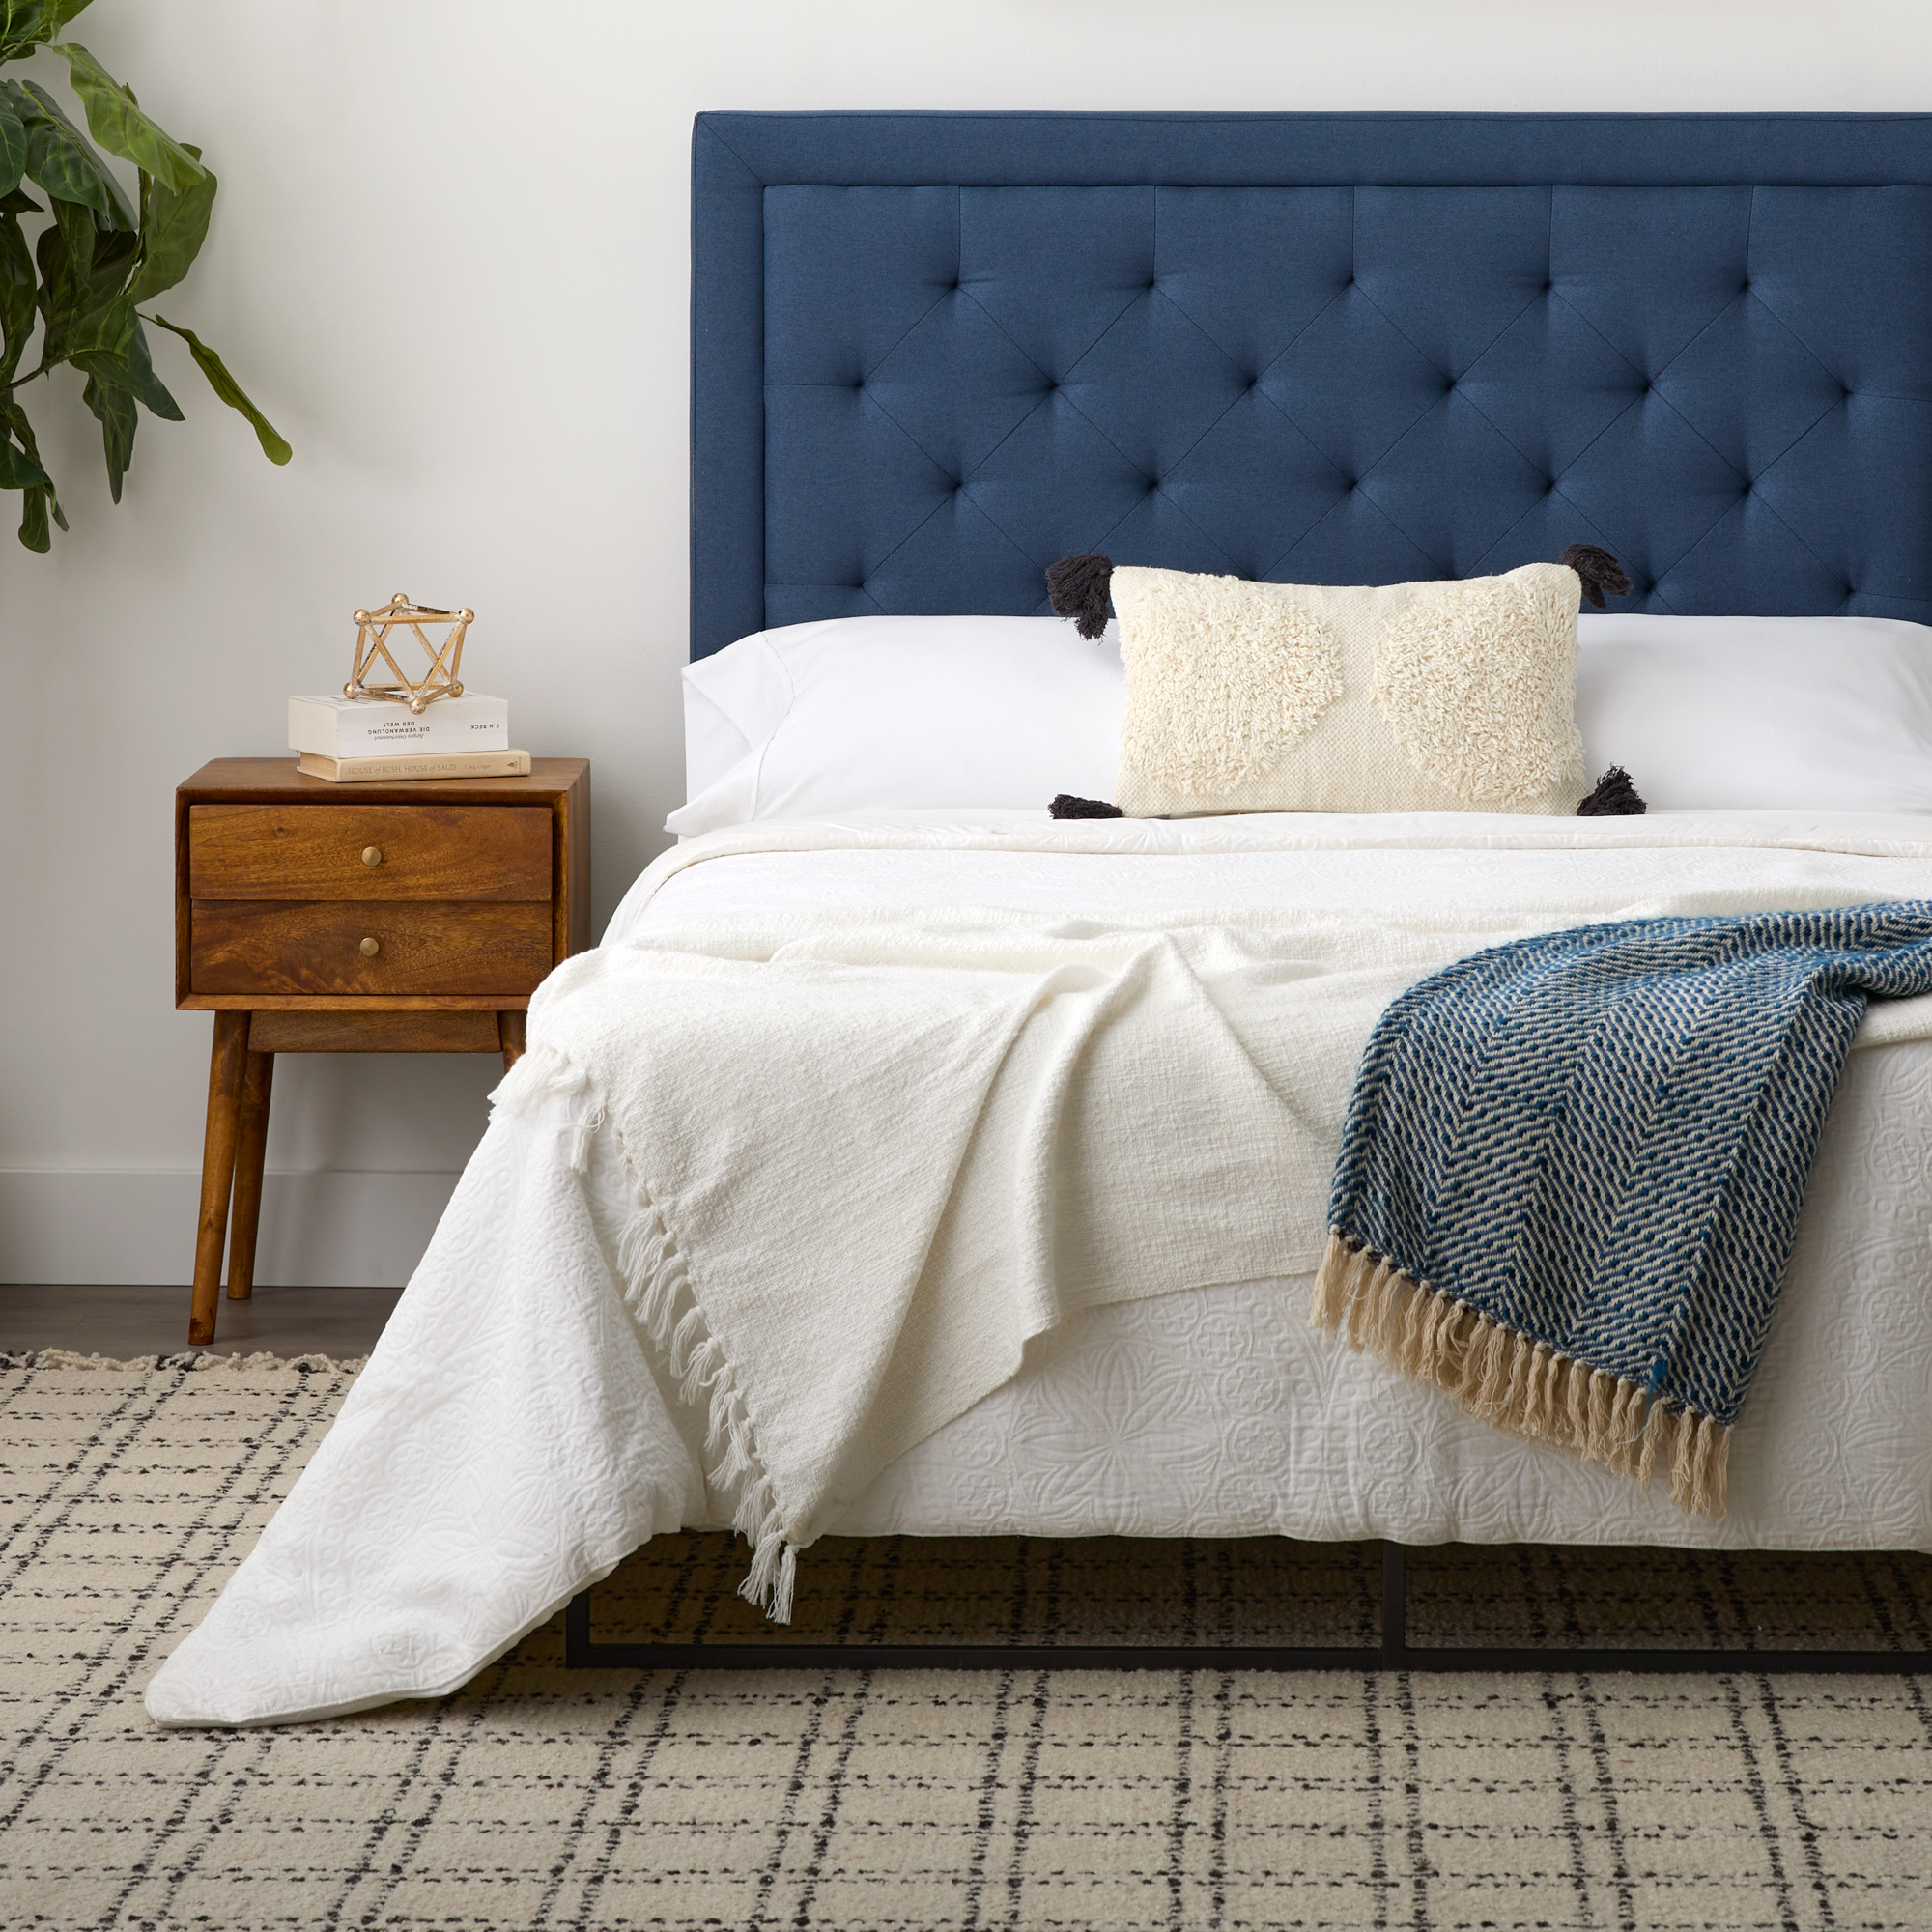 Rest Haven Medford Rectangle Upholstered Headboard with Diamond Tufting, Queen, Navy - image 5 of 11